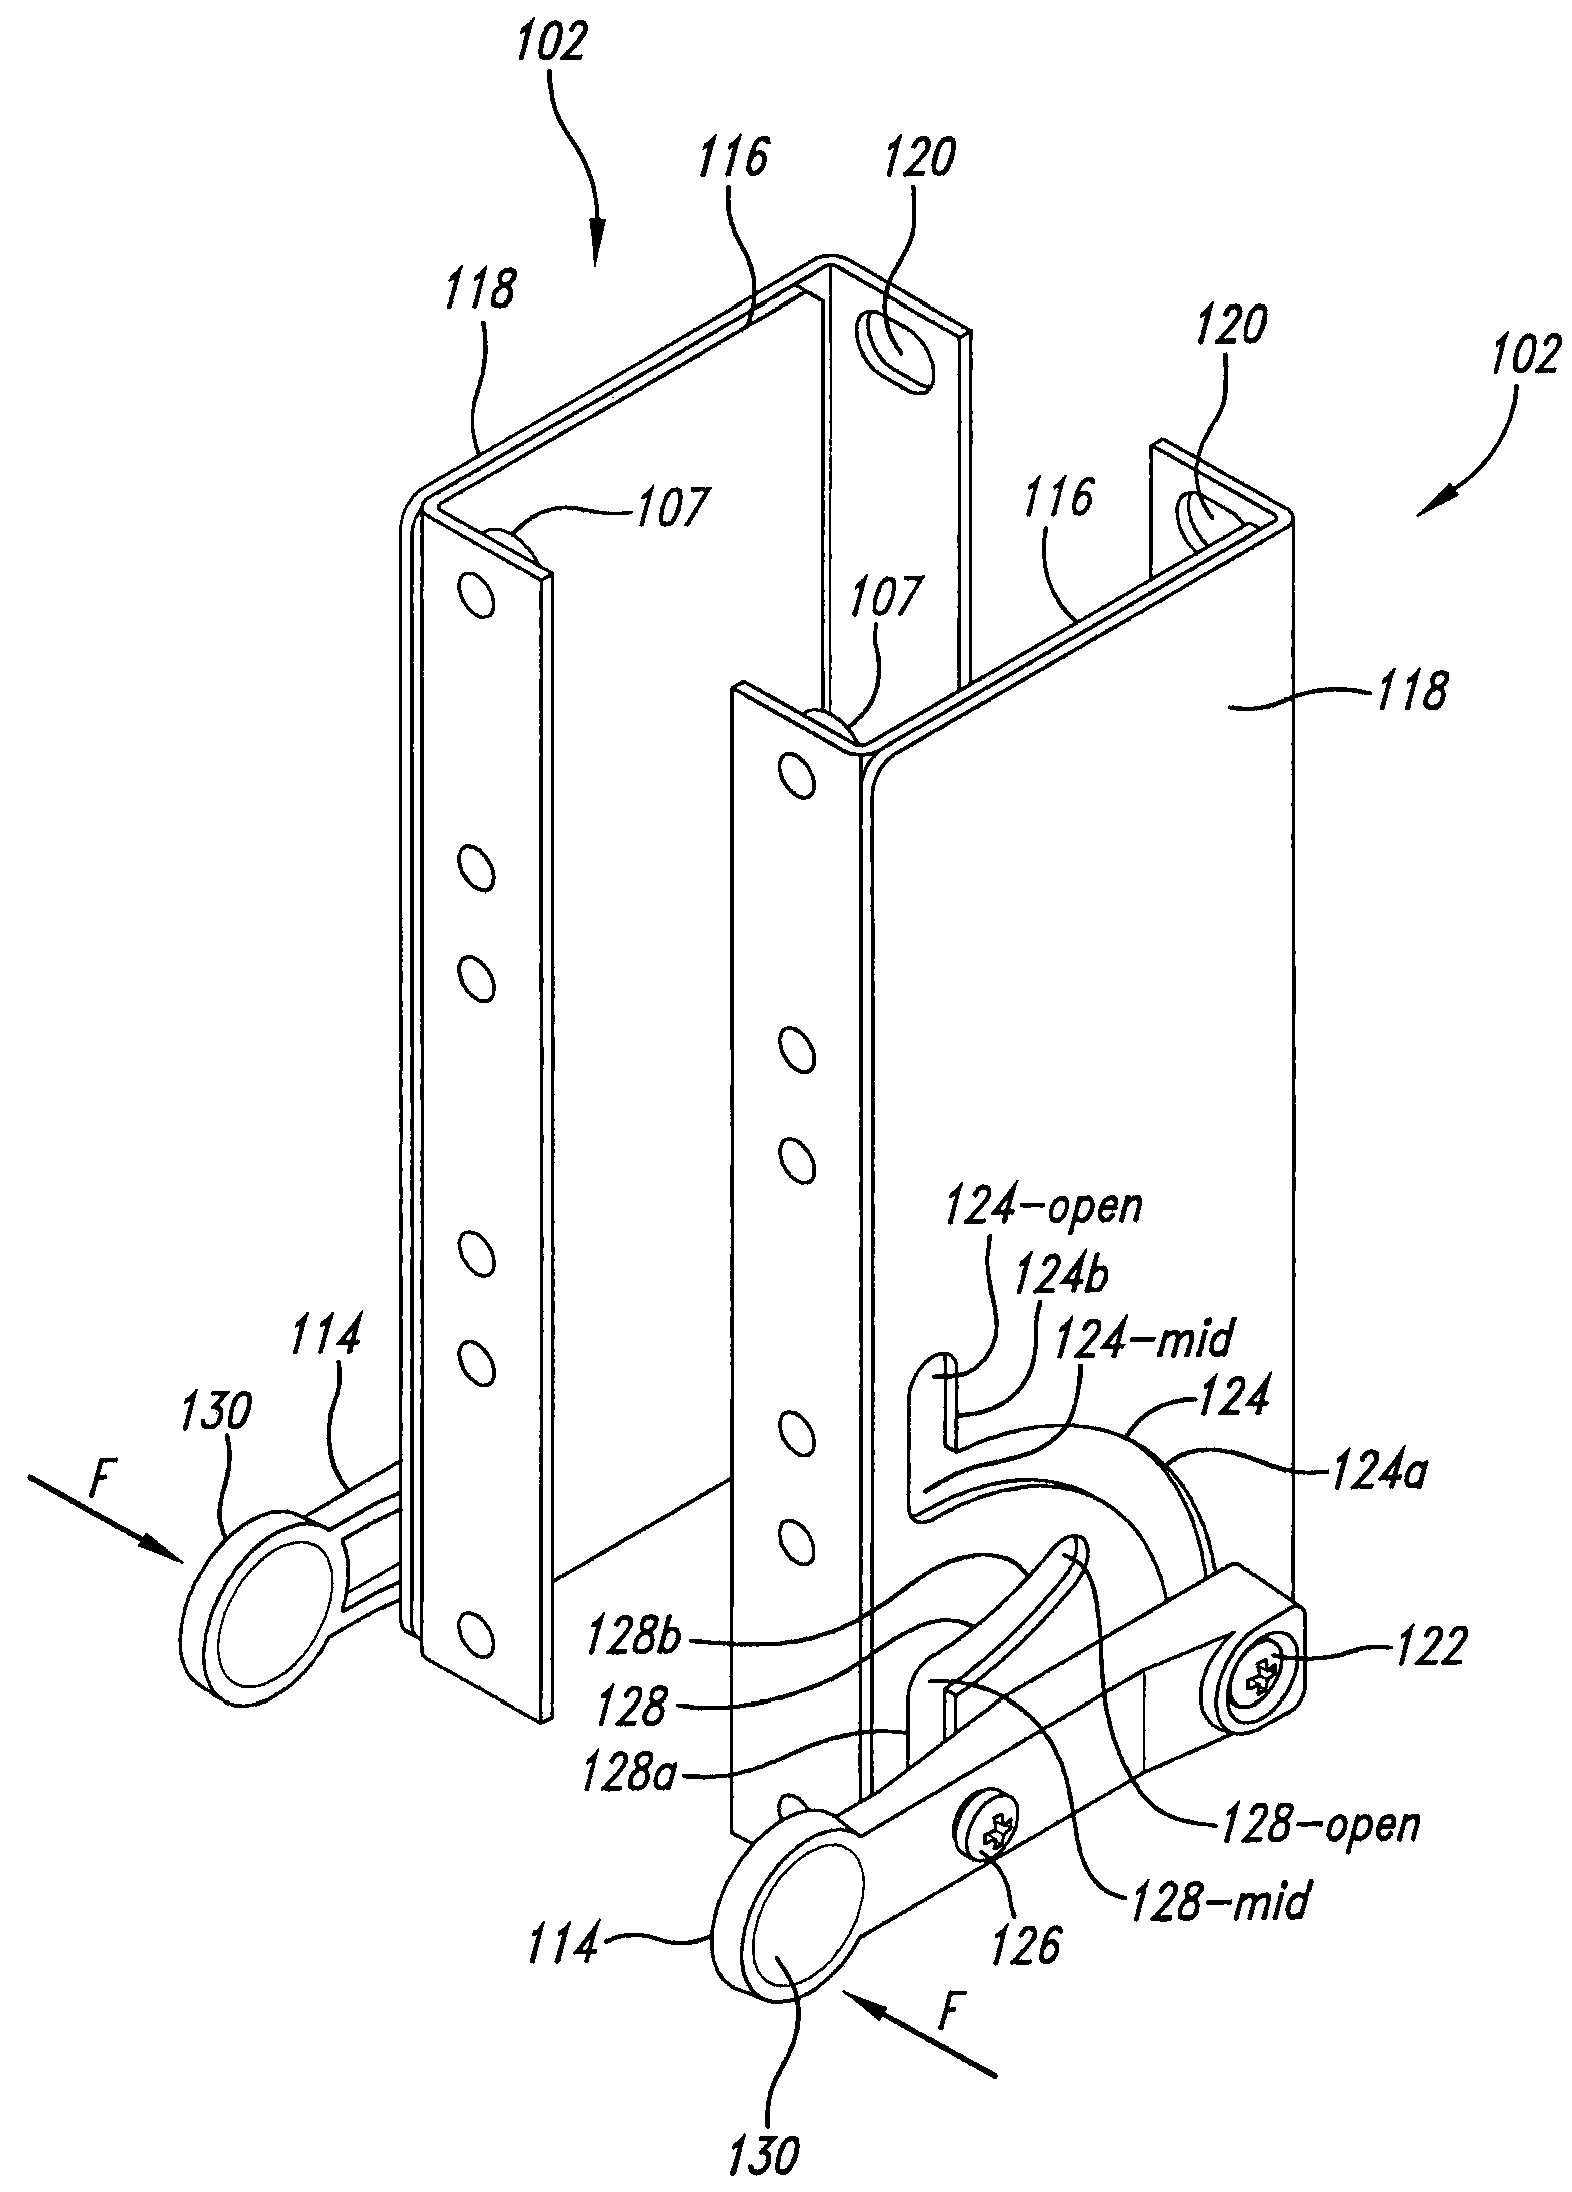 Rack mounted component door system and method